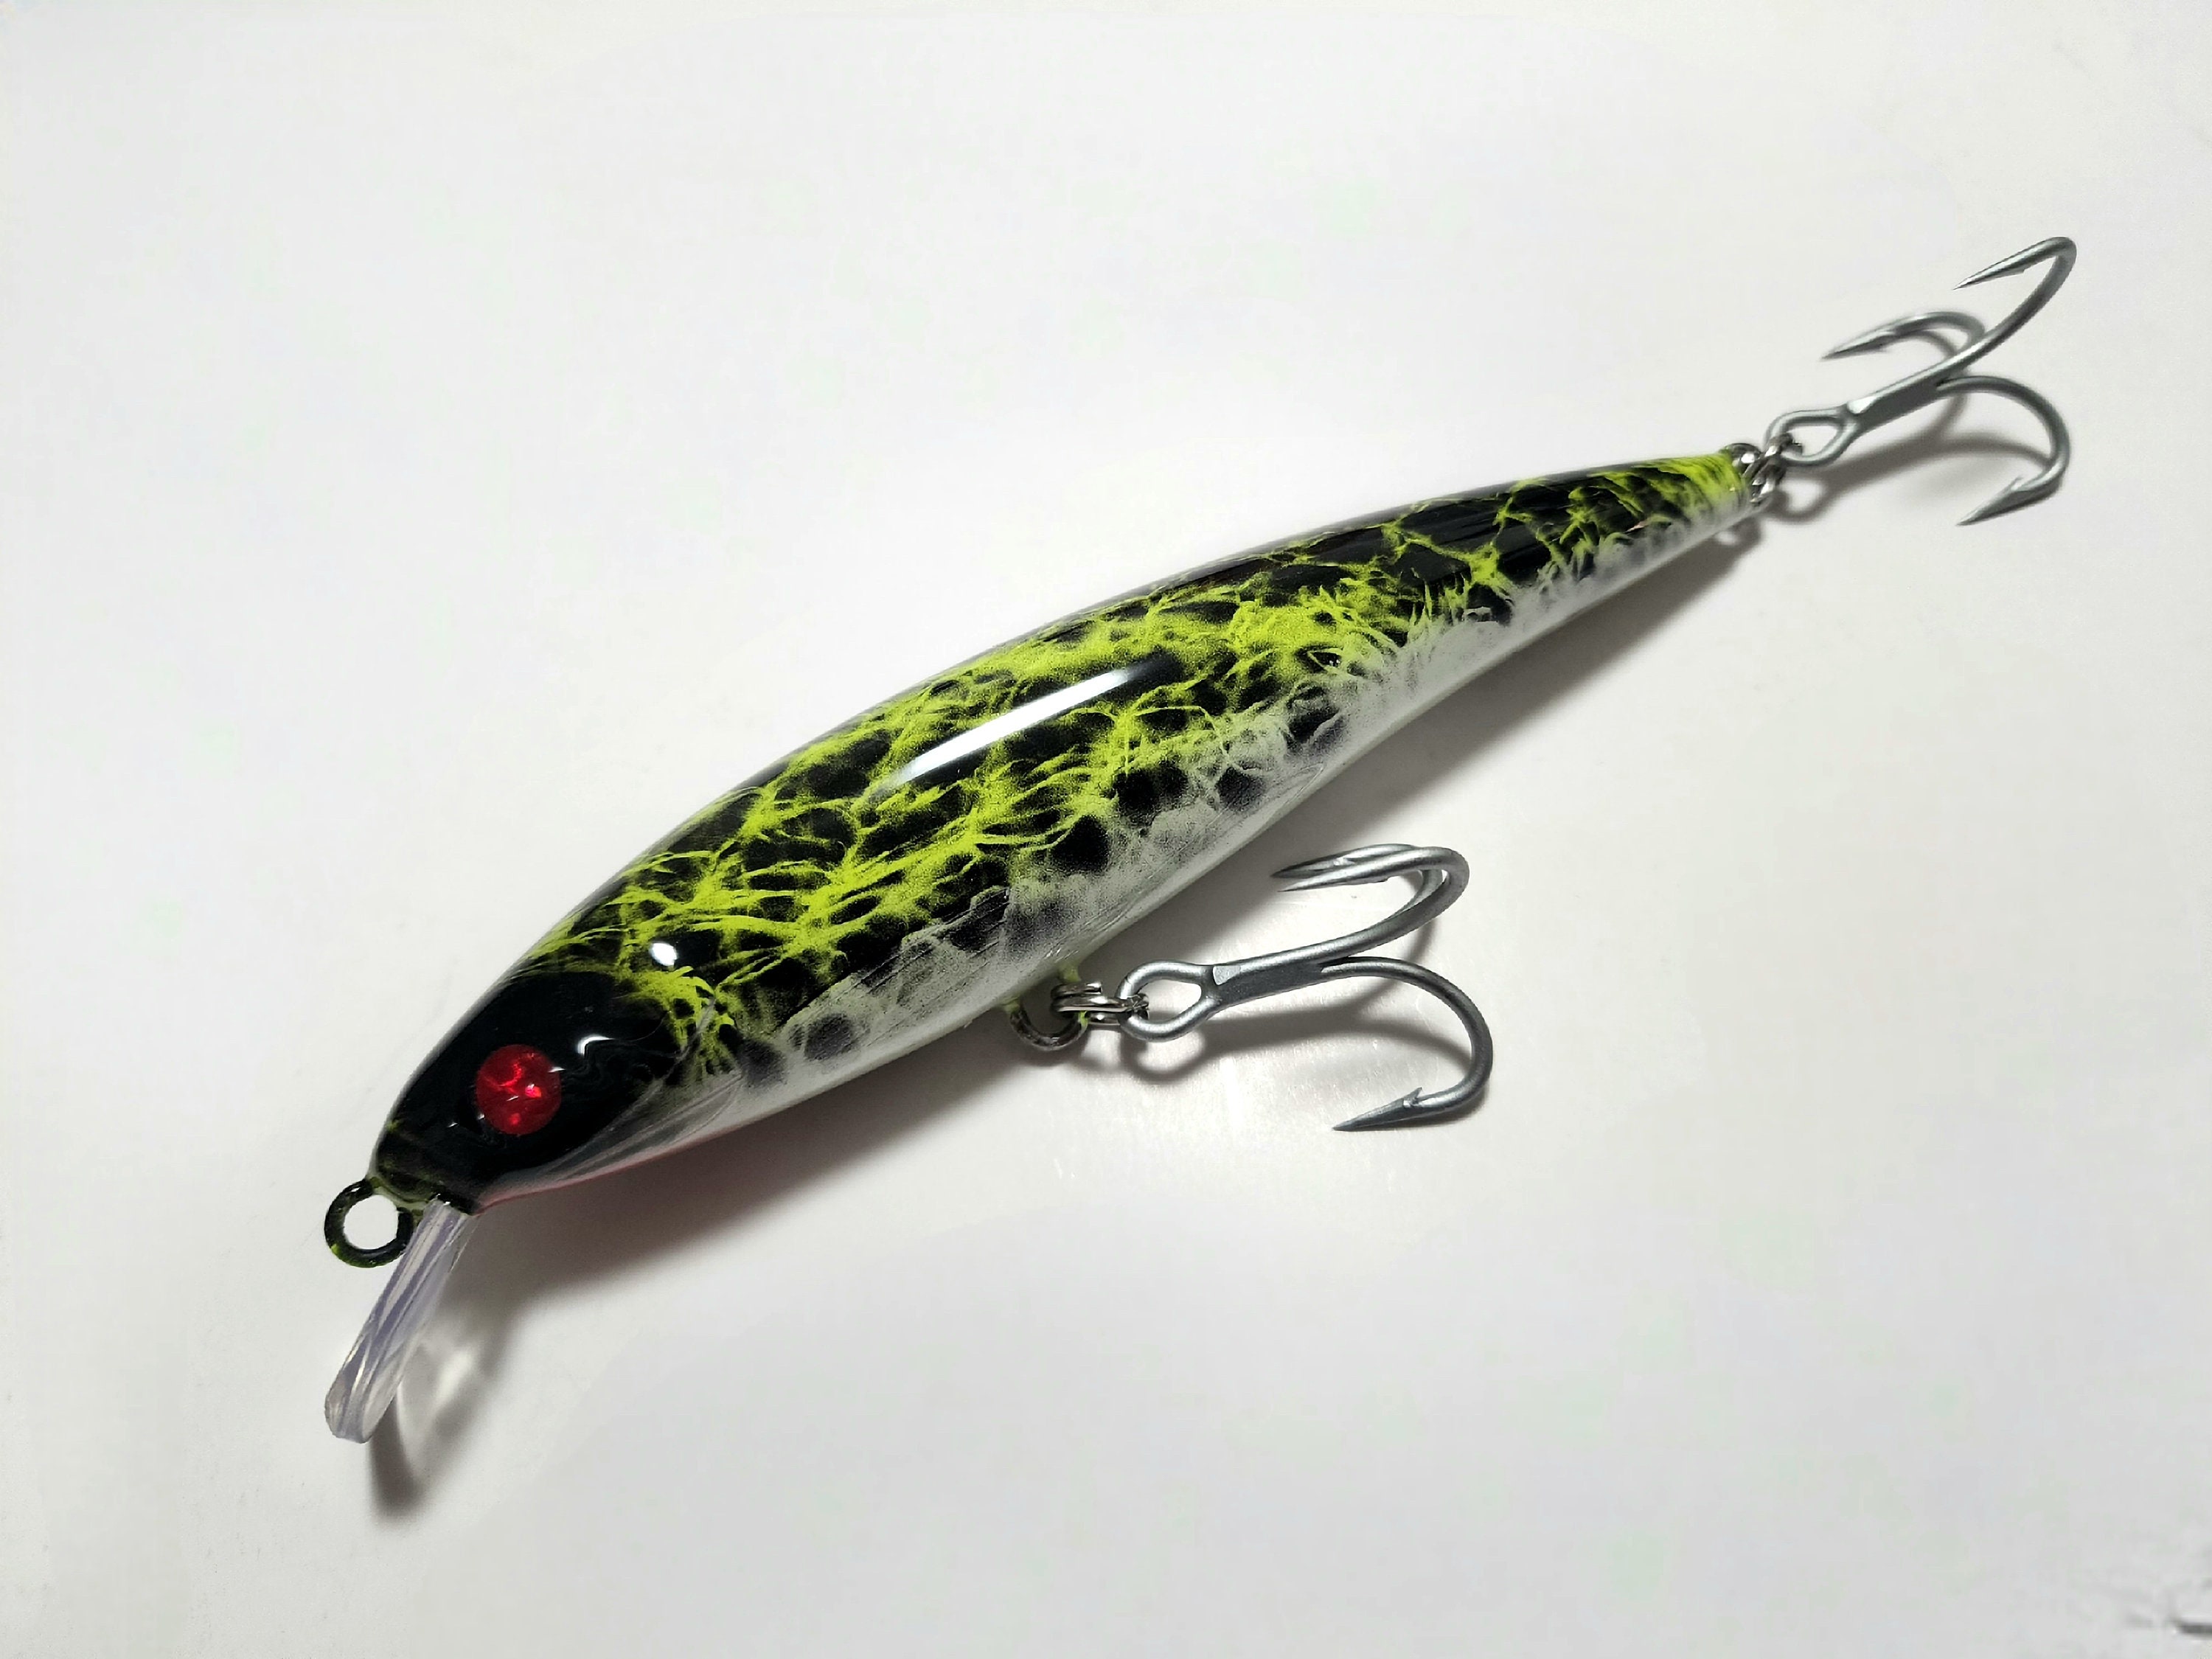 6 RIZZ Minnow, Striped Bass Lures, Bluefish Lures, Pike Lures, Surf Fishing  Lures, Custom Fishing Lures, Jerkbaits 